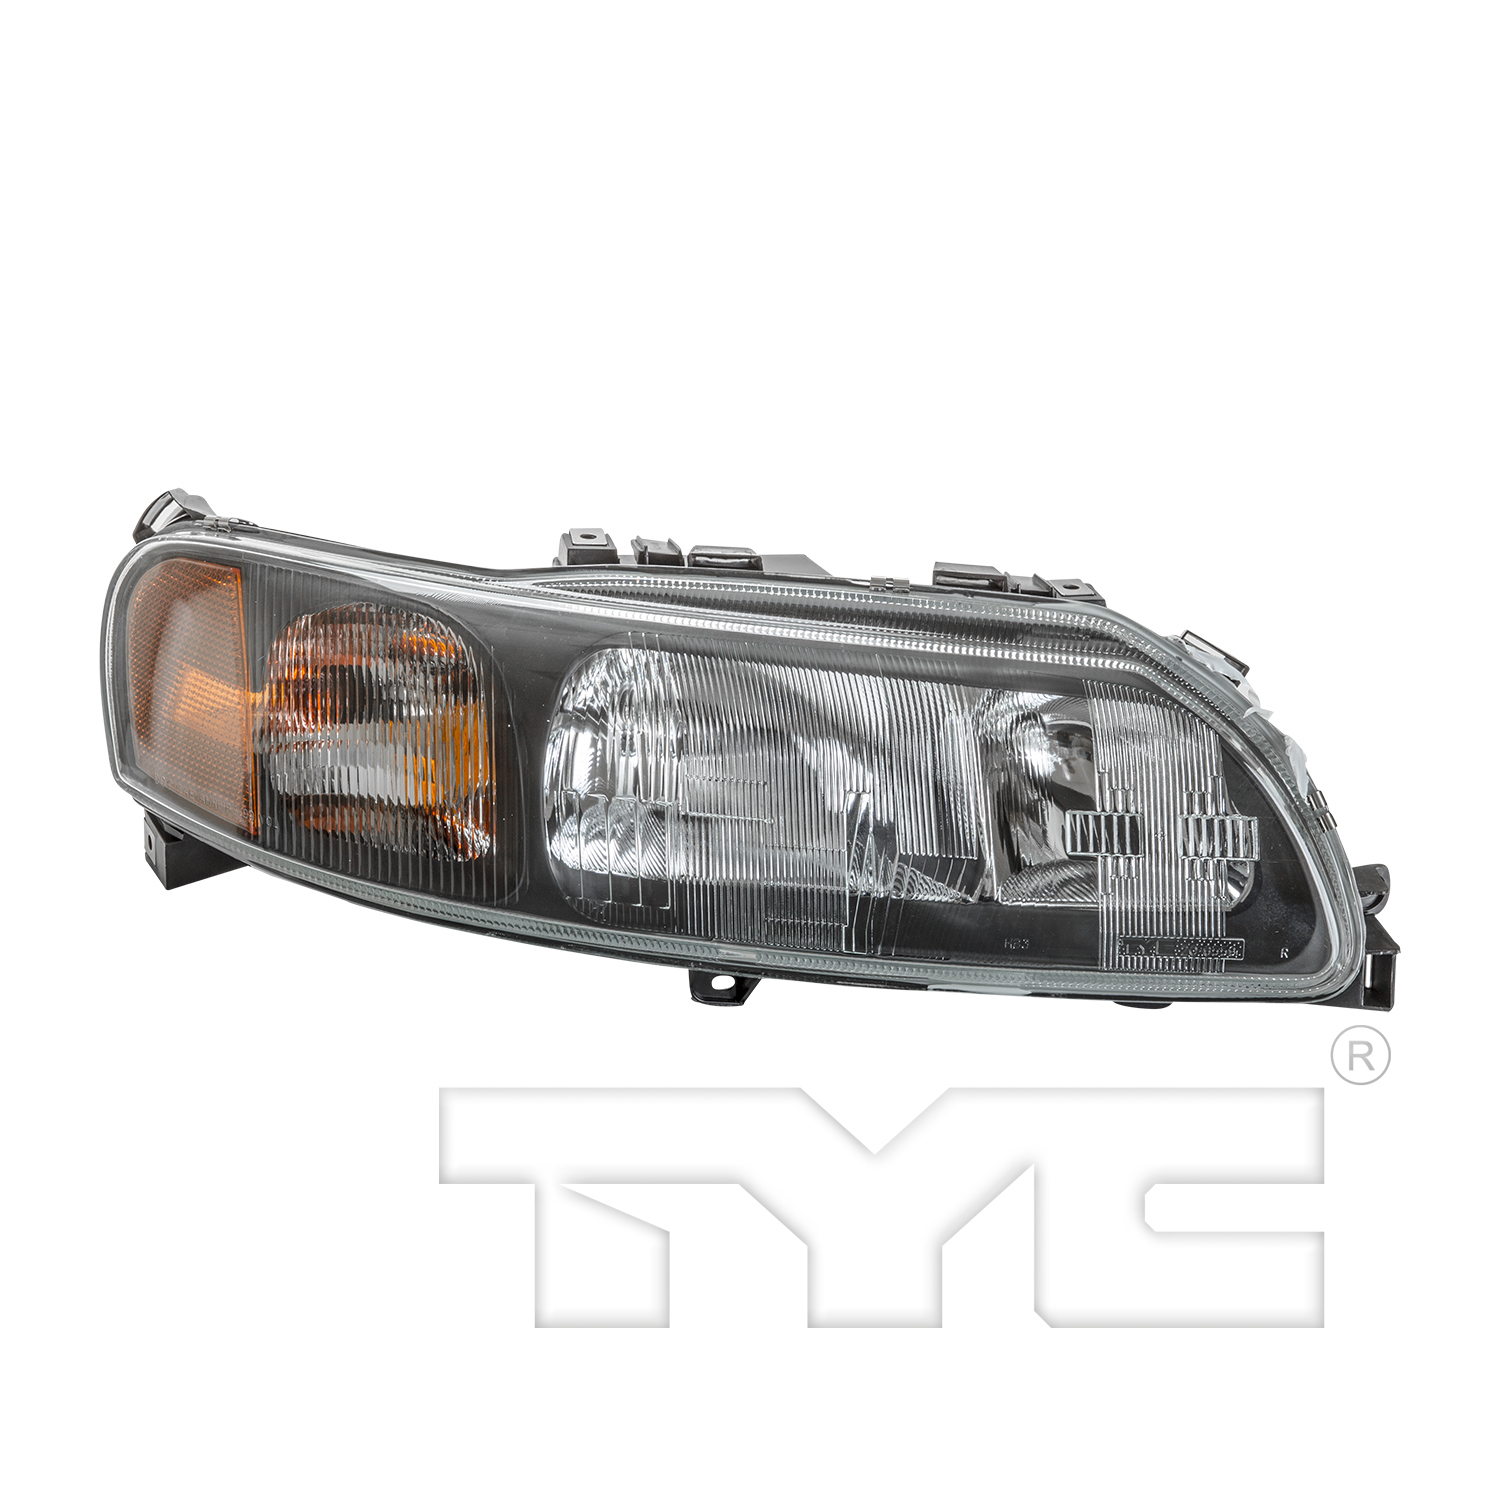 Aftermarket HEADLIGHTS for VOLVO - XC70, XC70,03-04,RT Headlamp assy composite